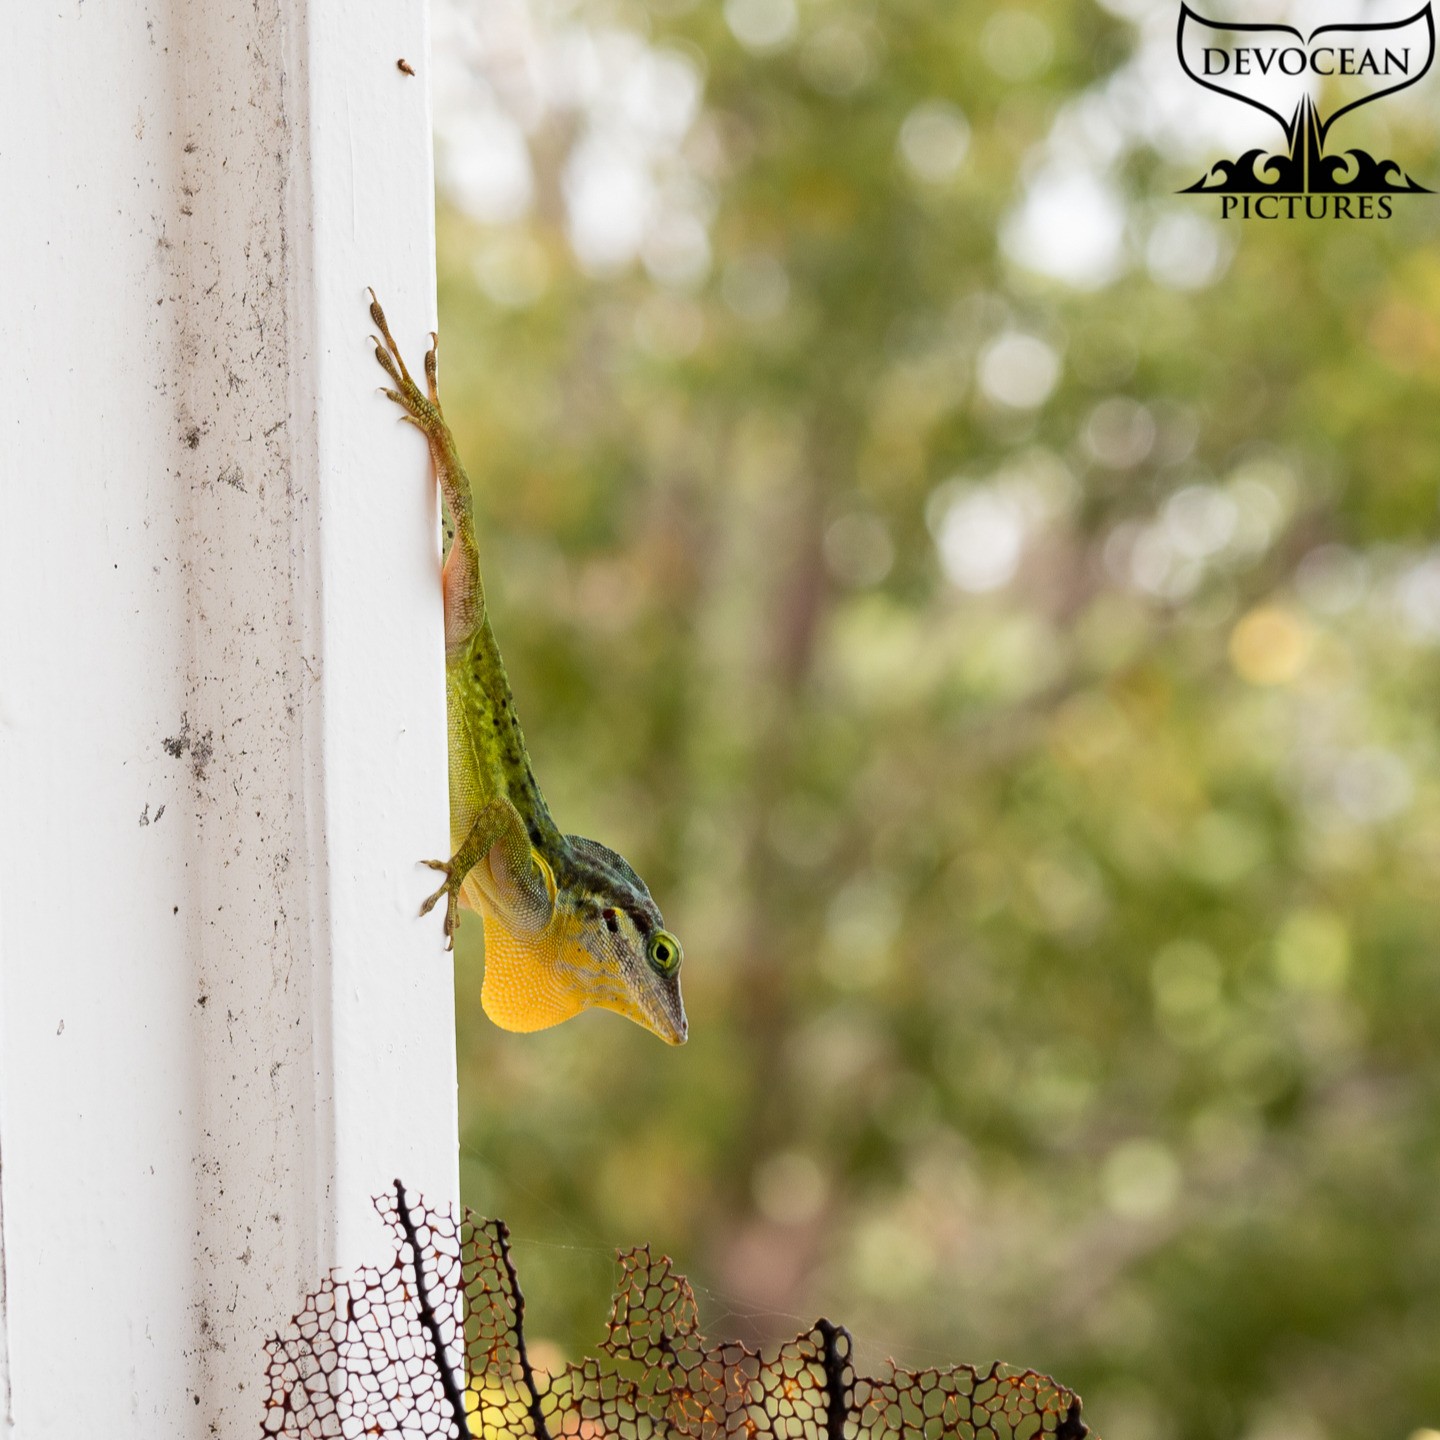 💚 Why we love Statia?

🍀 Nature at our doorstep! Actually, nature on our veranda in this case. The Green Tree Lizard (Anolis bimaculatis) is a frequent visitor. 

🐝 This morning he eyed the bees drinking at their water bowl. Not sure, that is the best snack available ... Though this lizard is strict insectivore and maybe developed a technique to eat bees without getting hurt.

✌ Wikipeadia doesn't specify its food source any further but throws in some more common names: "Anolis bimaculatus, the panther anole, also known as the St. Eustatius anole or Statia Bank tree anole, is a species of anole lizard that is endemic to the Caribbean Lesser Antilles. It is found on the St. Kitts Bank of islands, which comprise Saint Kitts, Nevis, and Sint Eustatius." I didn't know Statia is part of the St. Kitts Bank of islands but it has a nice ring to it. 

👉 Clearly, common names vary a lot. That's why it is best to also include a scientific name. Even though a lot of the names derive from Latin, it is not the only source for scientific names. However, the endings of the words are put into Latin, even if the word originates in Greek. Confusing? That’s science for you! 😘

🧐 We keep on eye out for our green friend in order to capture its hunting activity one of these days.

#natureatyourdoorstep #lizard #green #dewlap #Anolisbimaculatus #statia #statiabank #visitstatia #discoverstatia #eustatius #dutchcaribbbean #caribbeannetherlands #caribischnederland #garden #statializard #classification #scientific #species #islandlife #inselleben #exploreyourbackyard #lovestatia #love #travel #explore #savenature #observe #devocean #devotion #insectivore